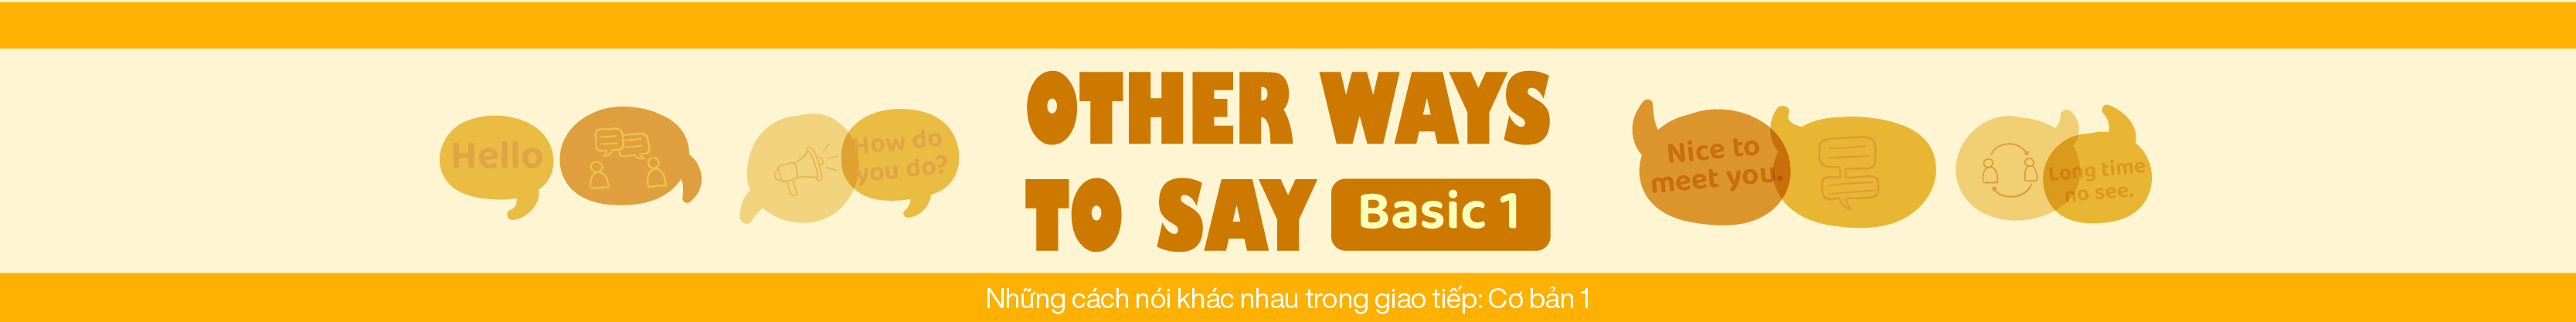 OTHER WAYS TO SAY: BASIC 1 banner